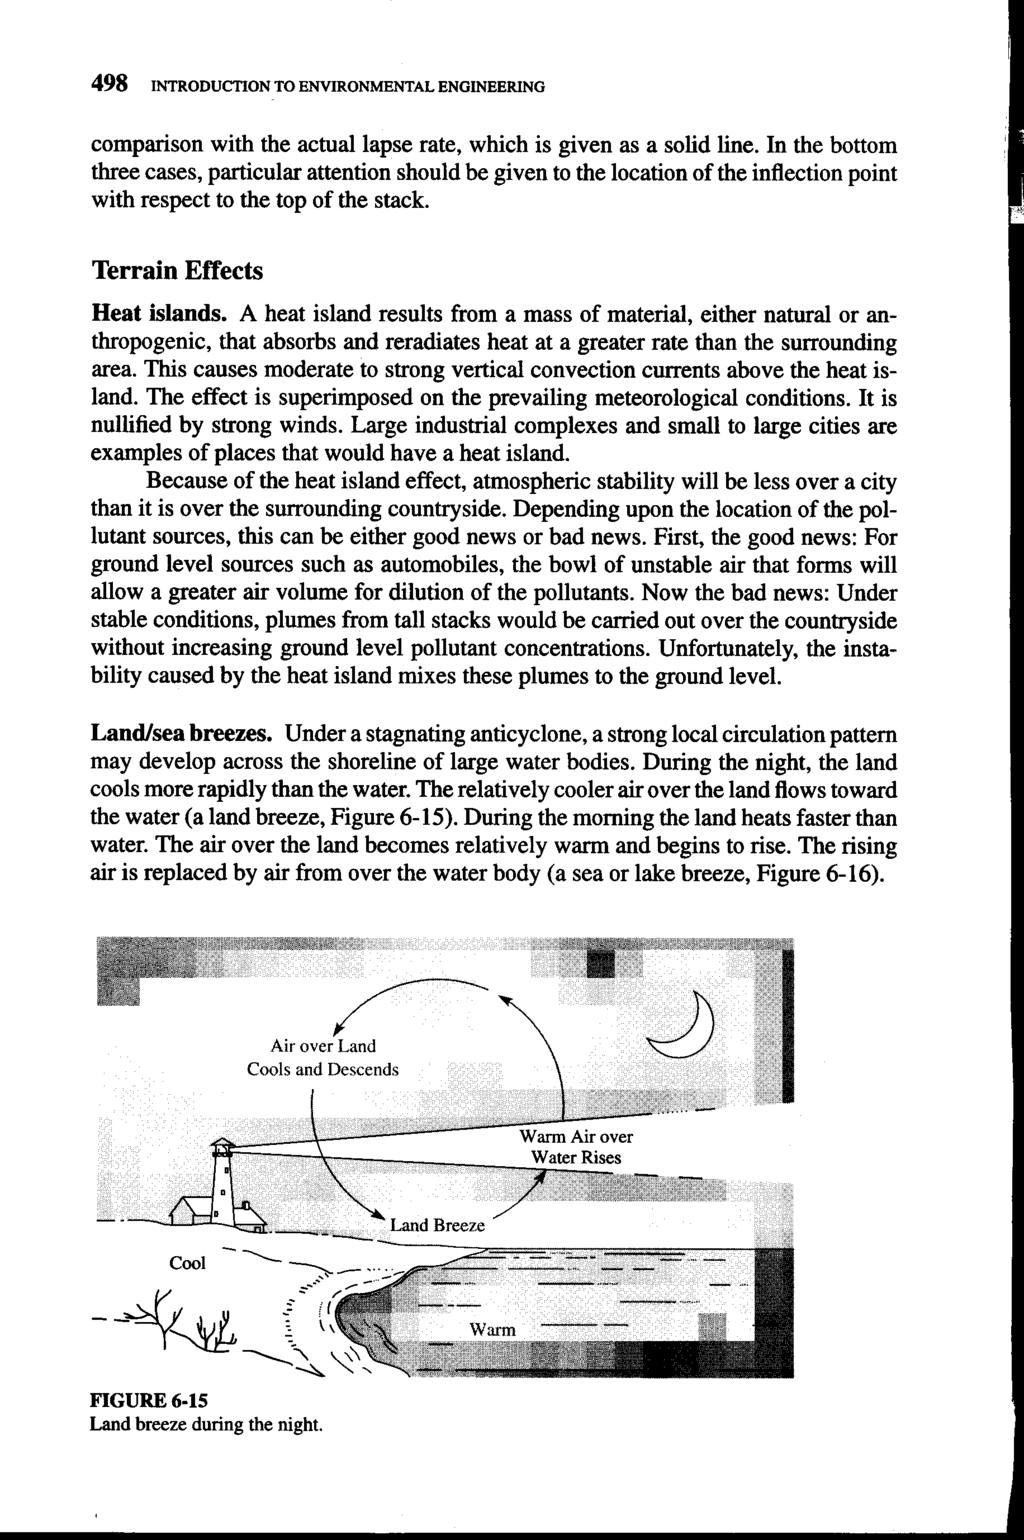 498 INTRODUCTION TO ENVIRONMENTAL ENGINEERING comparison with the actual lapse rate, which is given as a solid line.